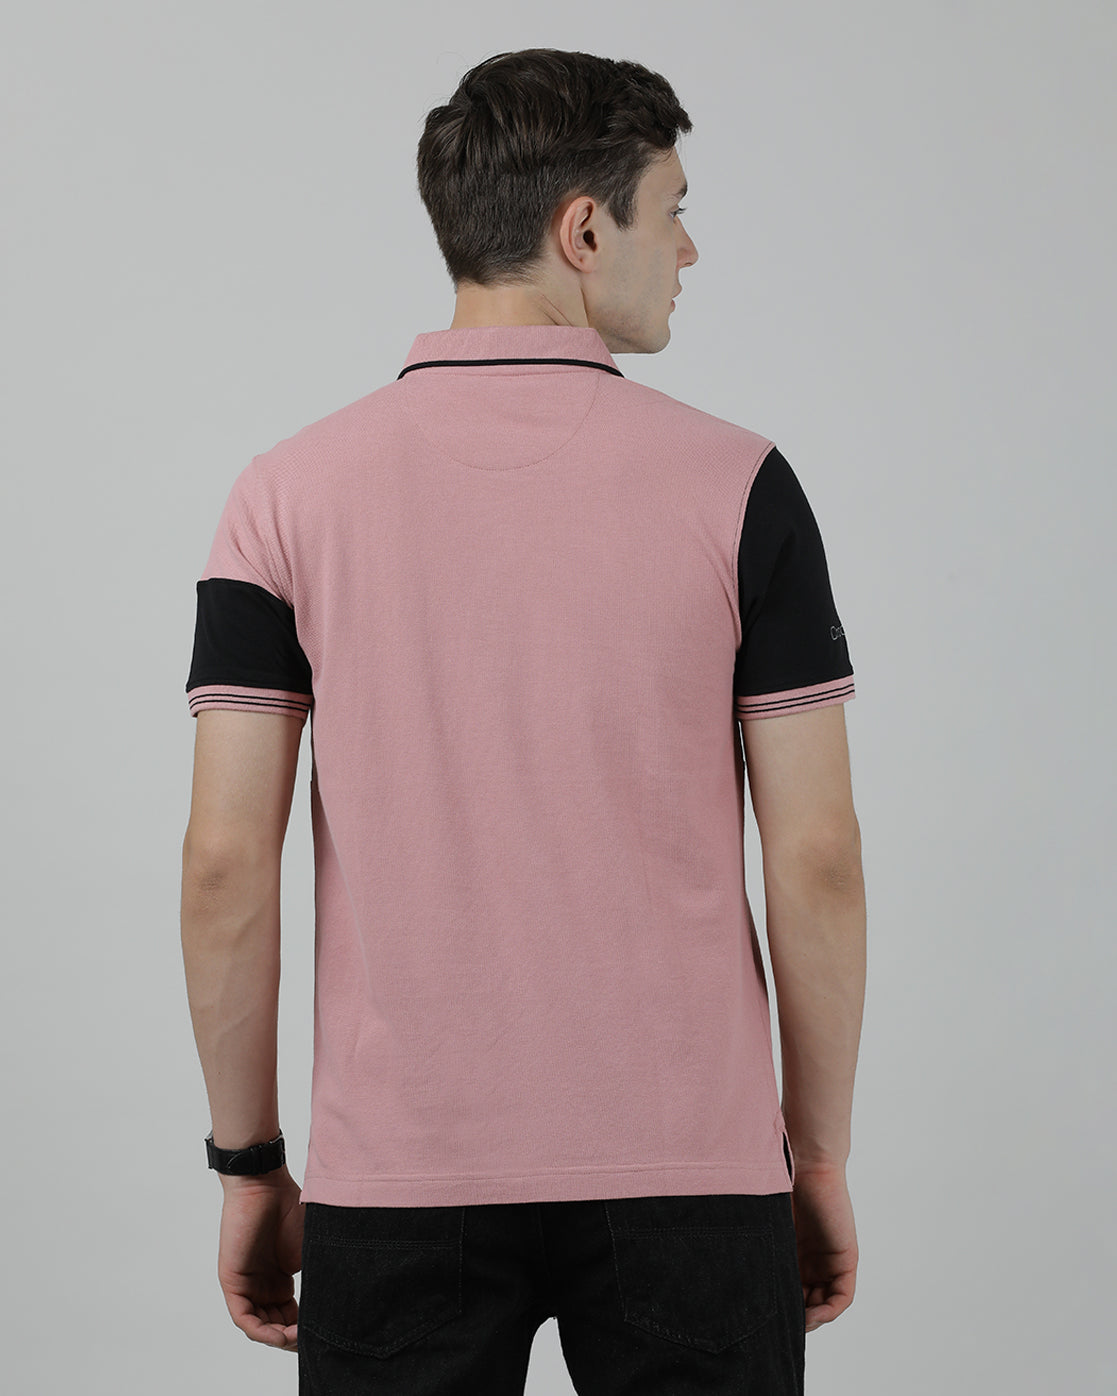 Casual Pink T-Shirt Cut and Sew Polo Half Sleeve Slim Fit with Collar for Men